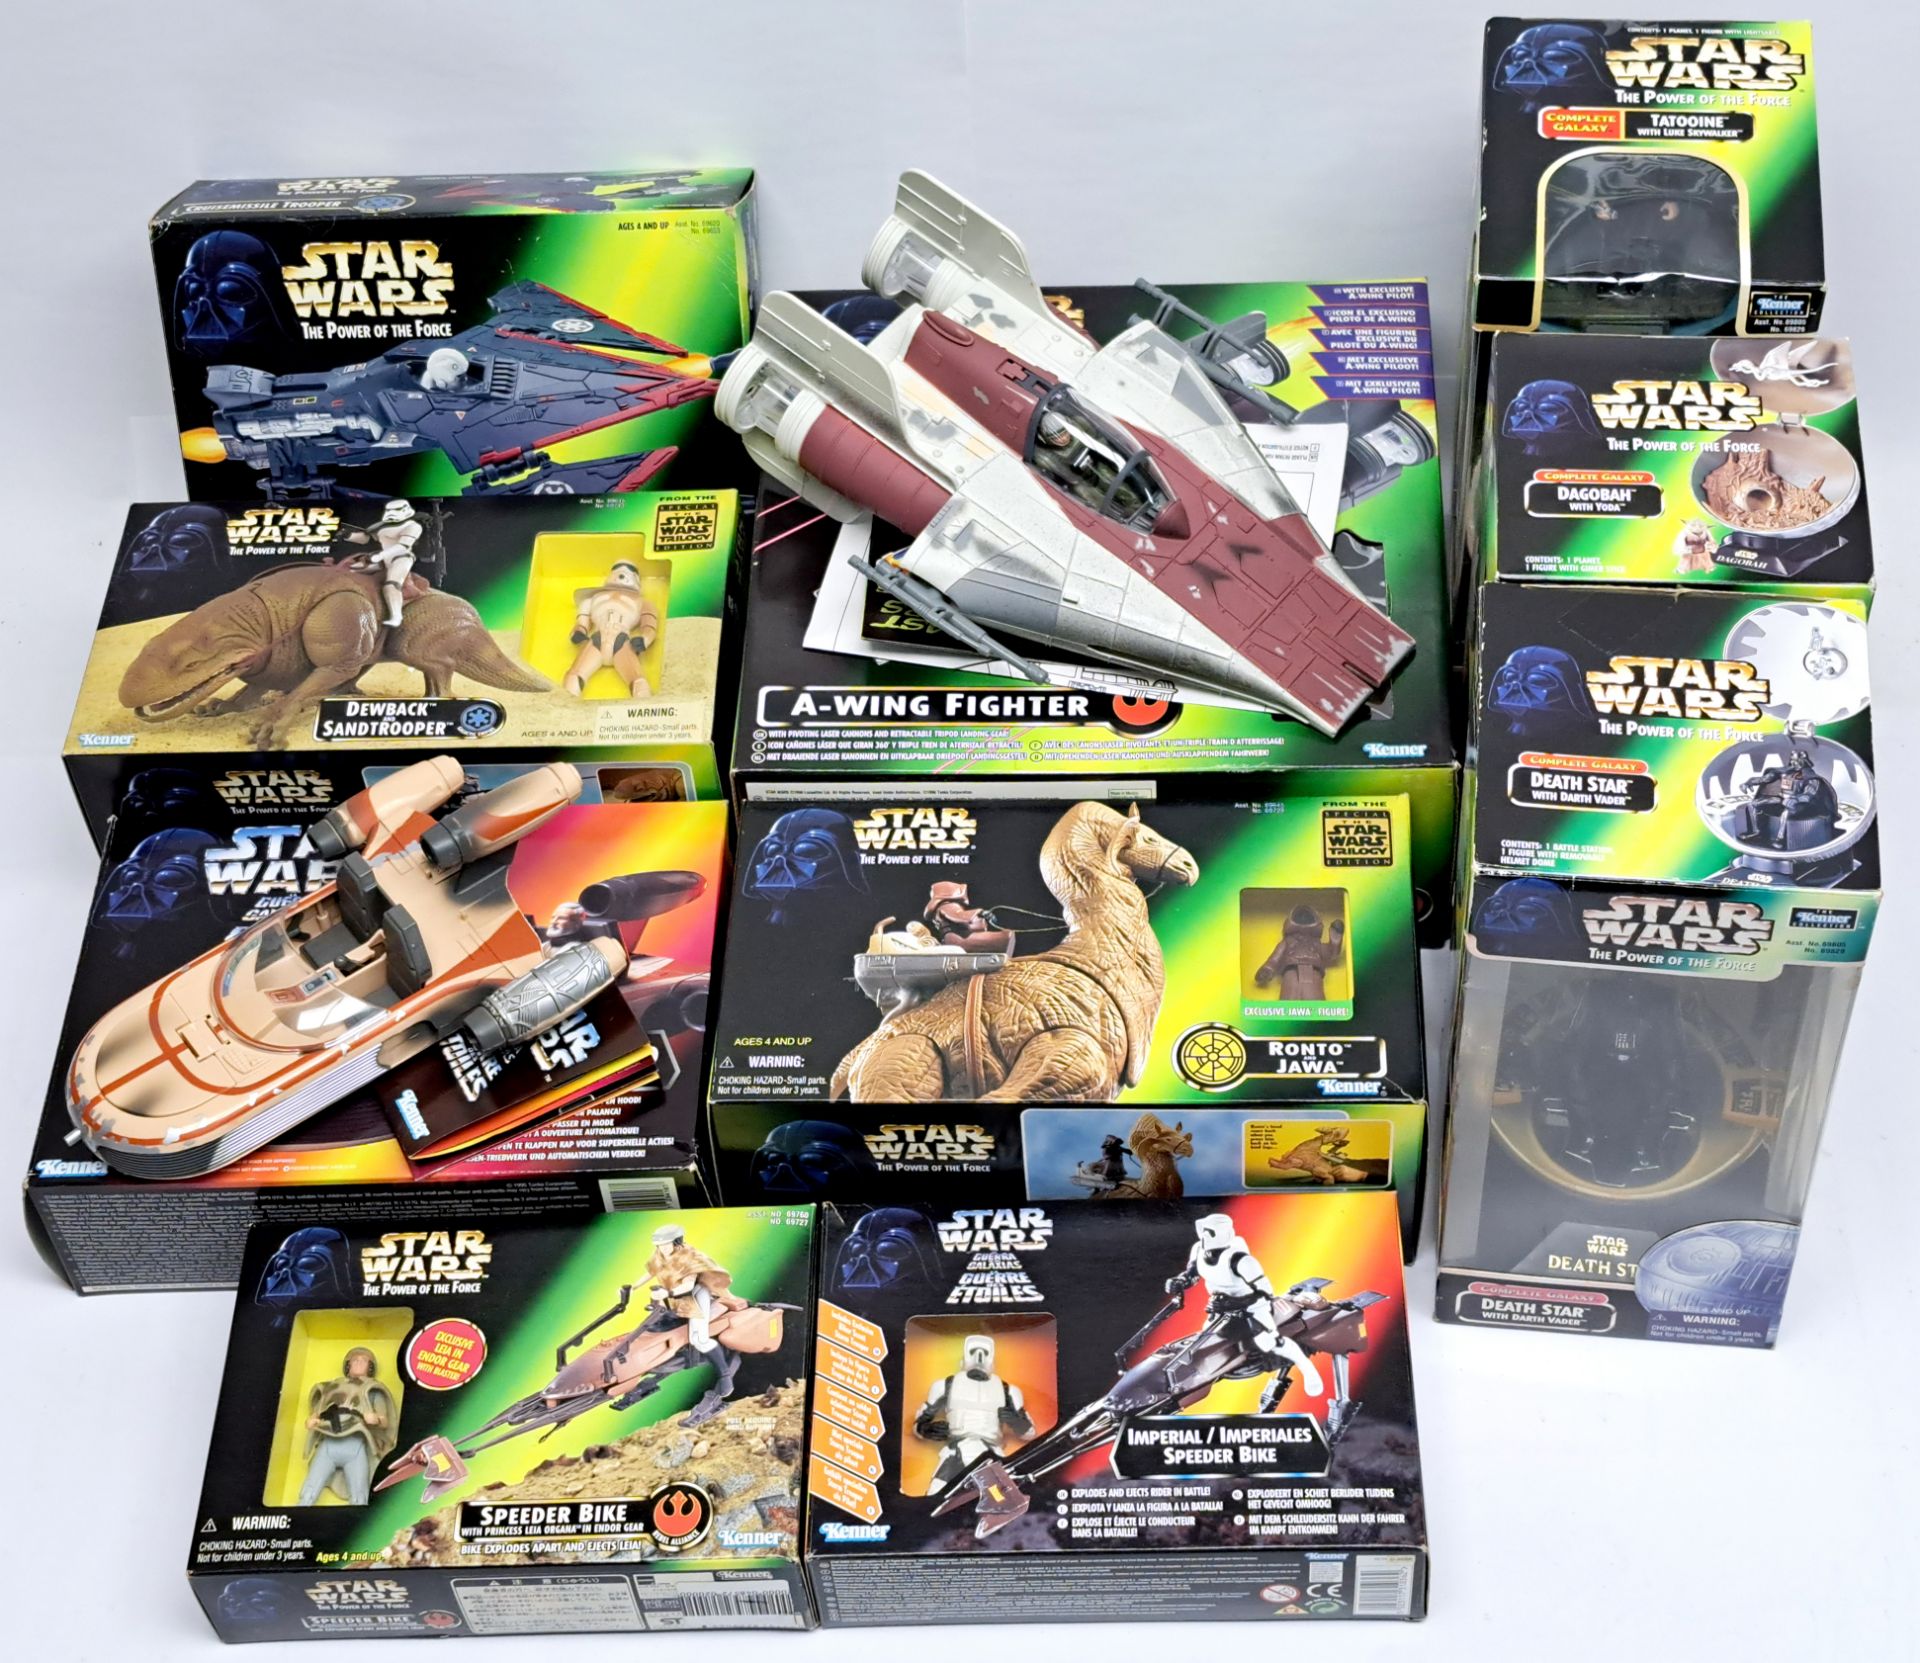 Star Wars Power of the force ships and creatures opened 